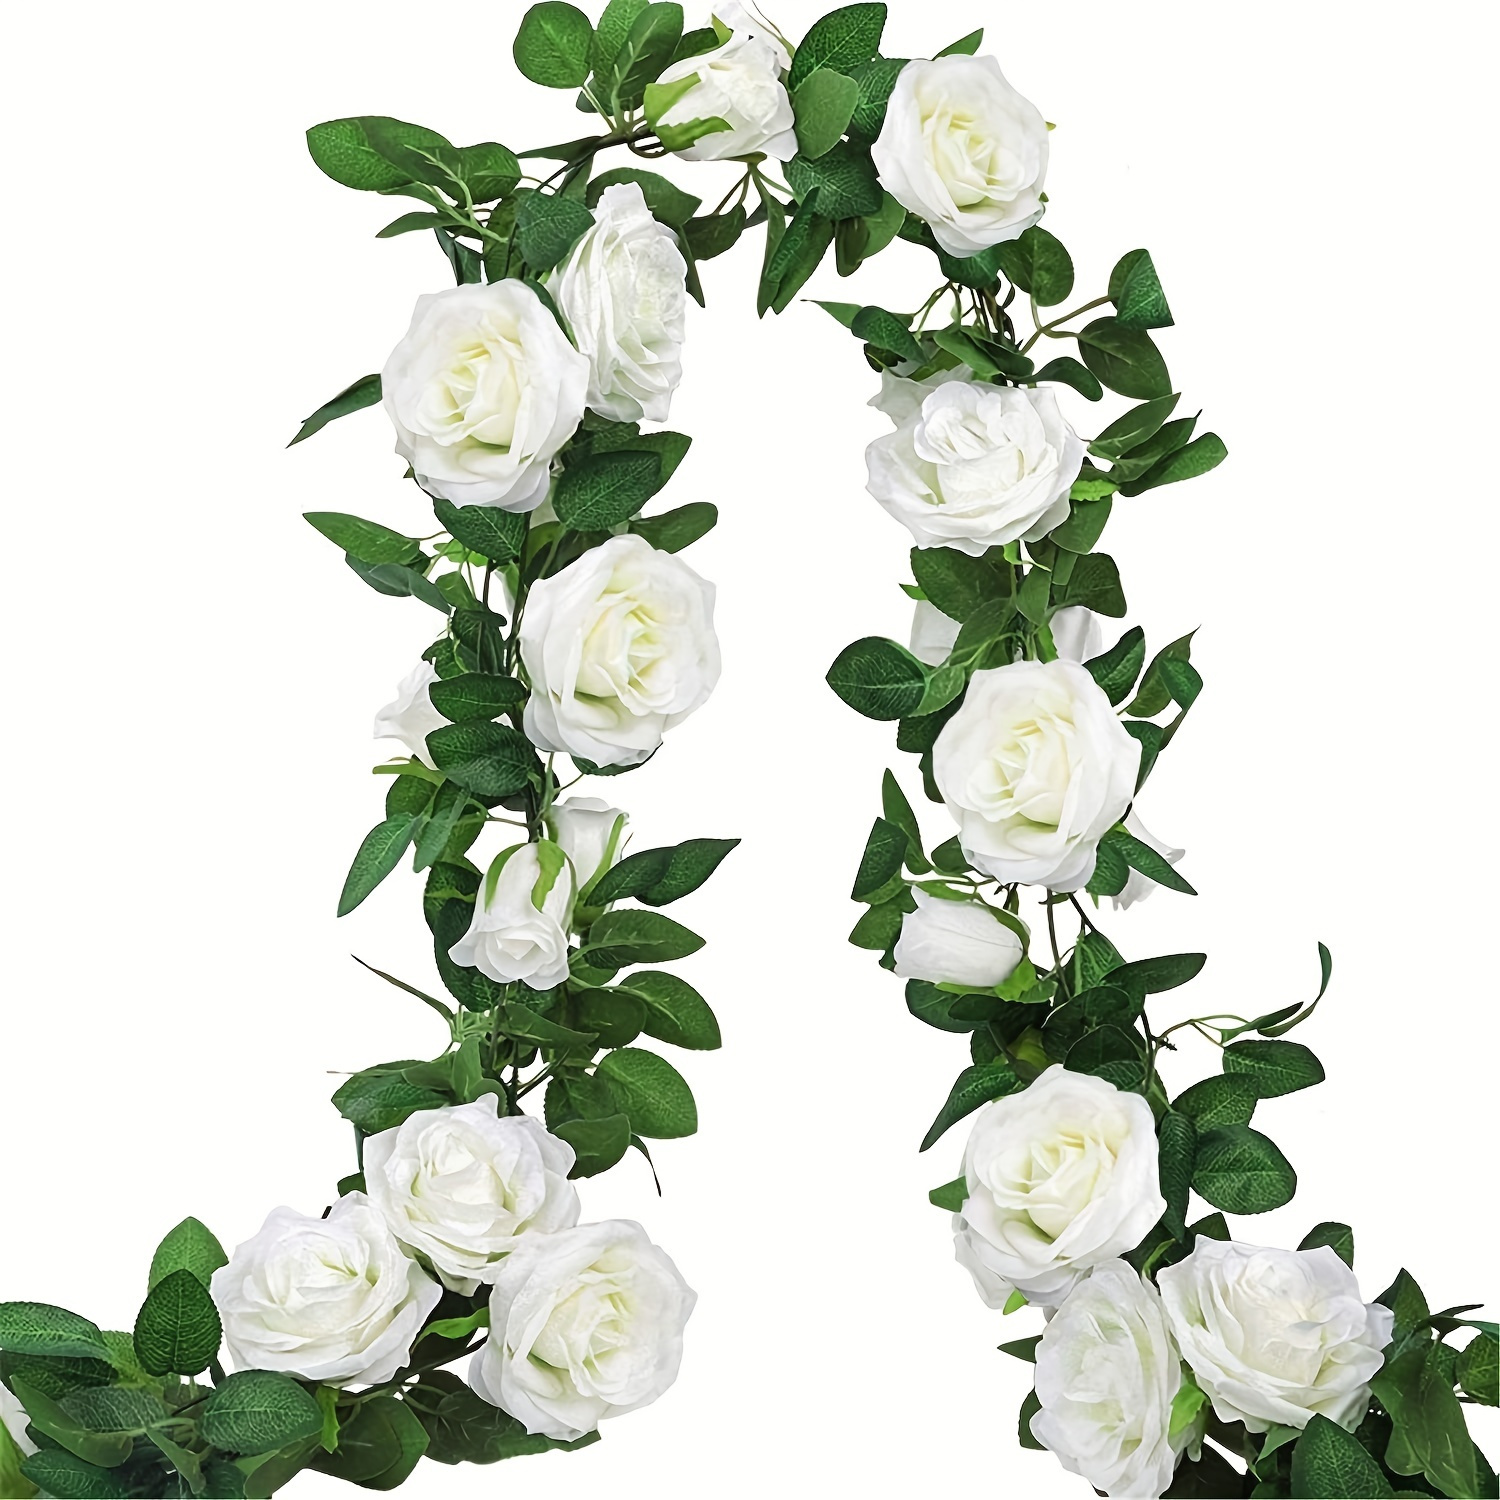 

2pcs, Artificial Rose Rattan, Hanging Vines Plants Faux Garlands, Fake Leaves Wall Decoration Pipes Cover Ceiling Landscaping Green Plants Twining Vines, Photo Props, Outdoor Decor 7.2ft